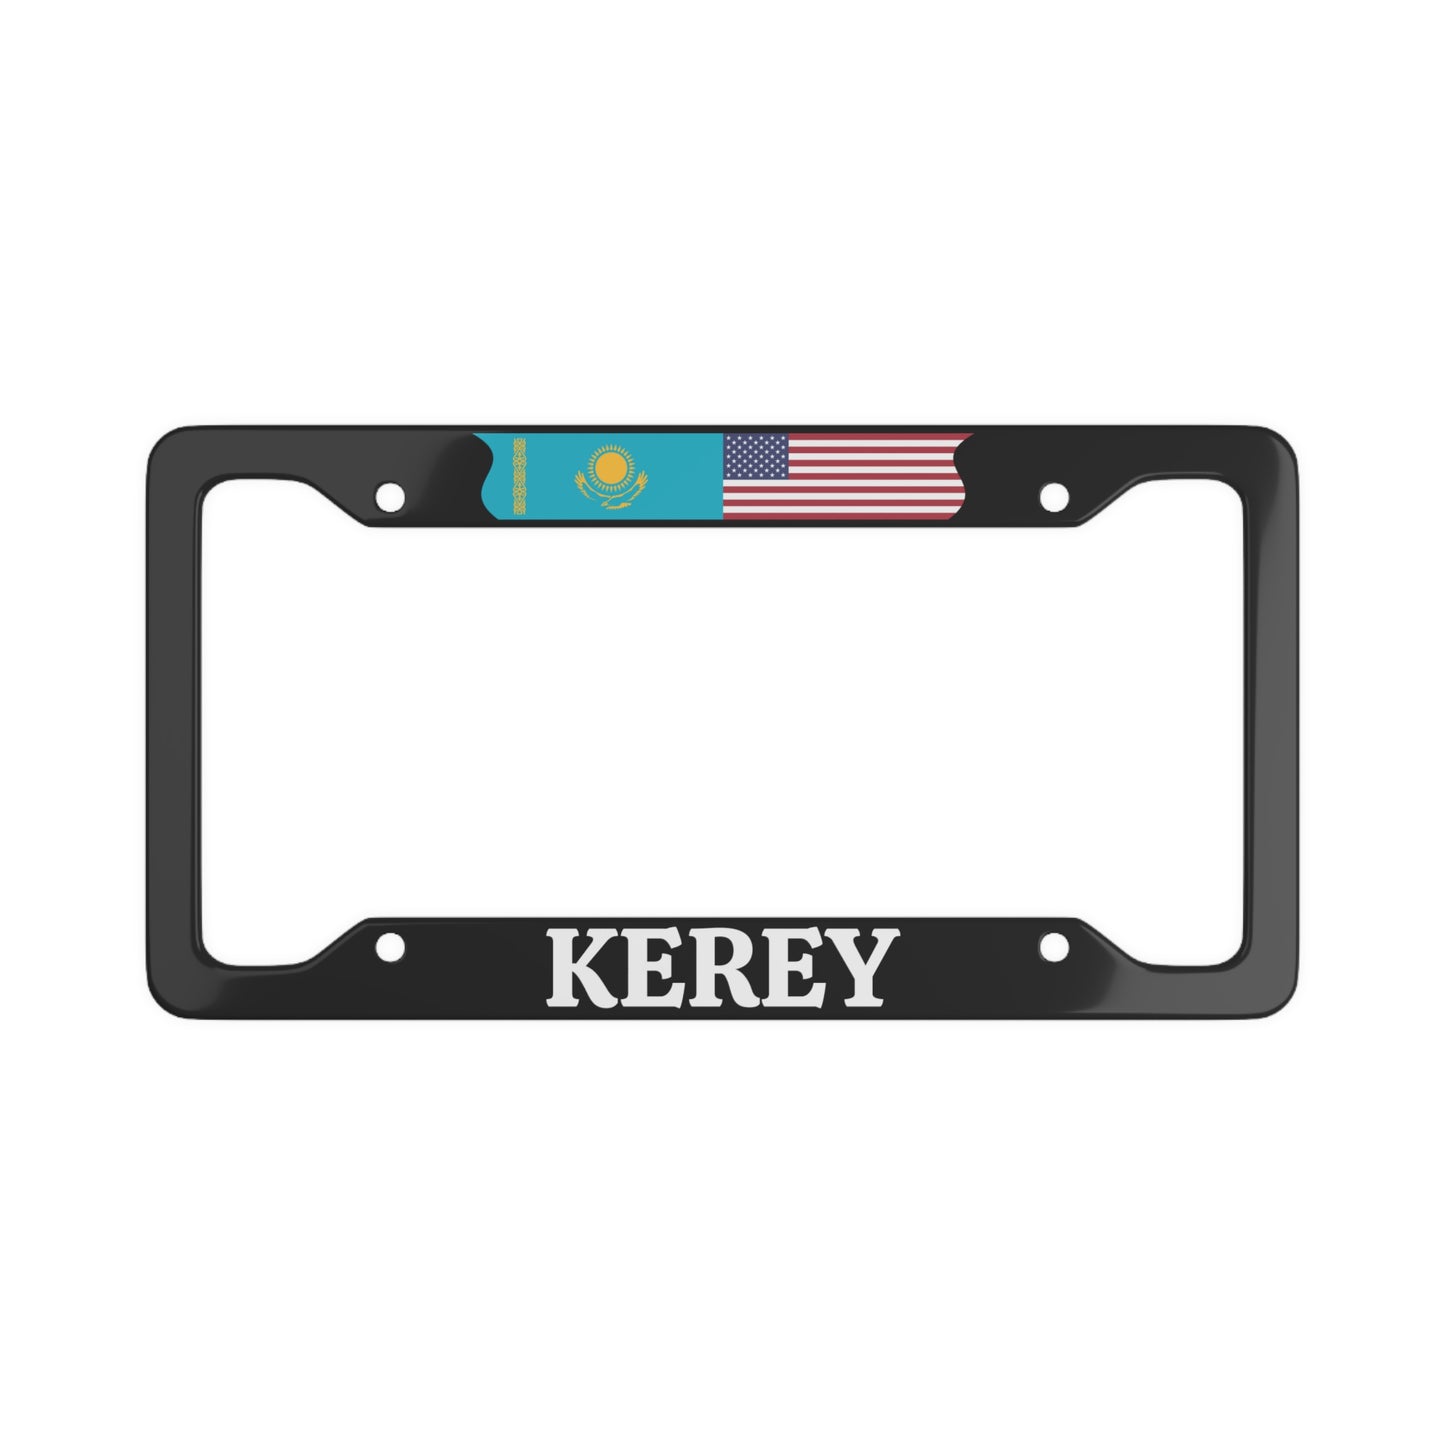 KEREY with flag License Plate Frame